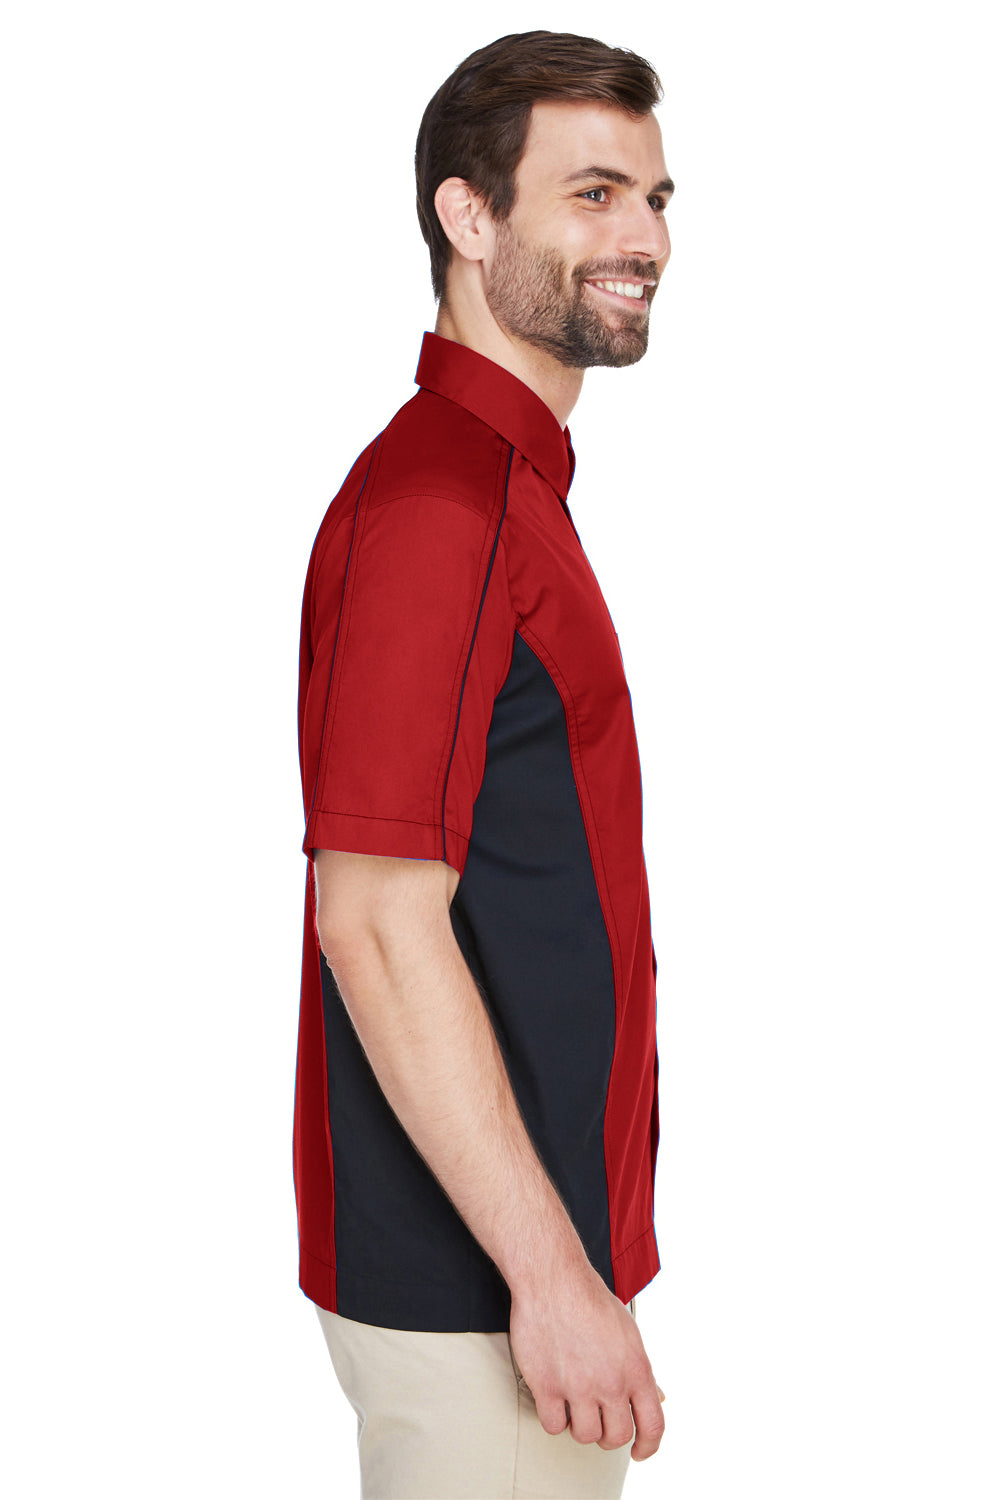 North End 87042 Mens Fuse Short Sleeve Button Down Shirt w/ Pocket Red/Black Side